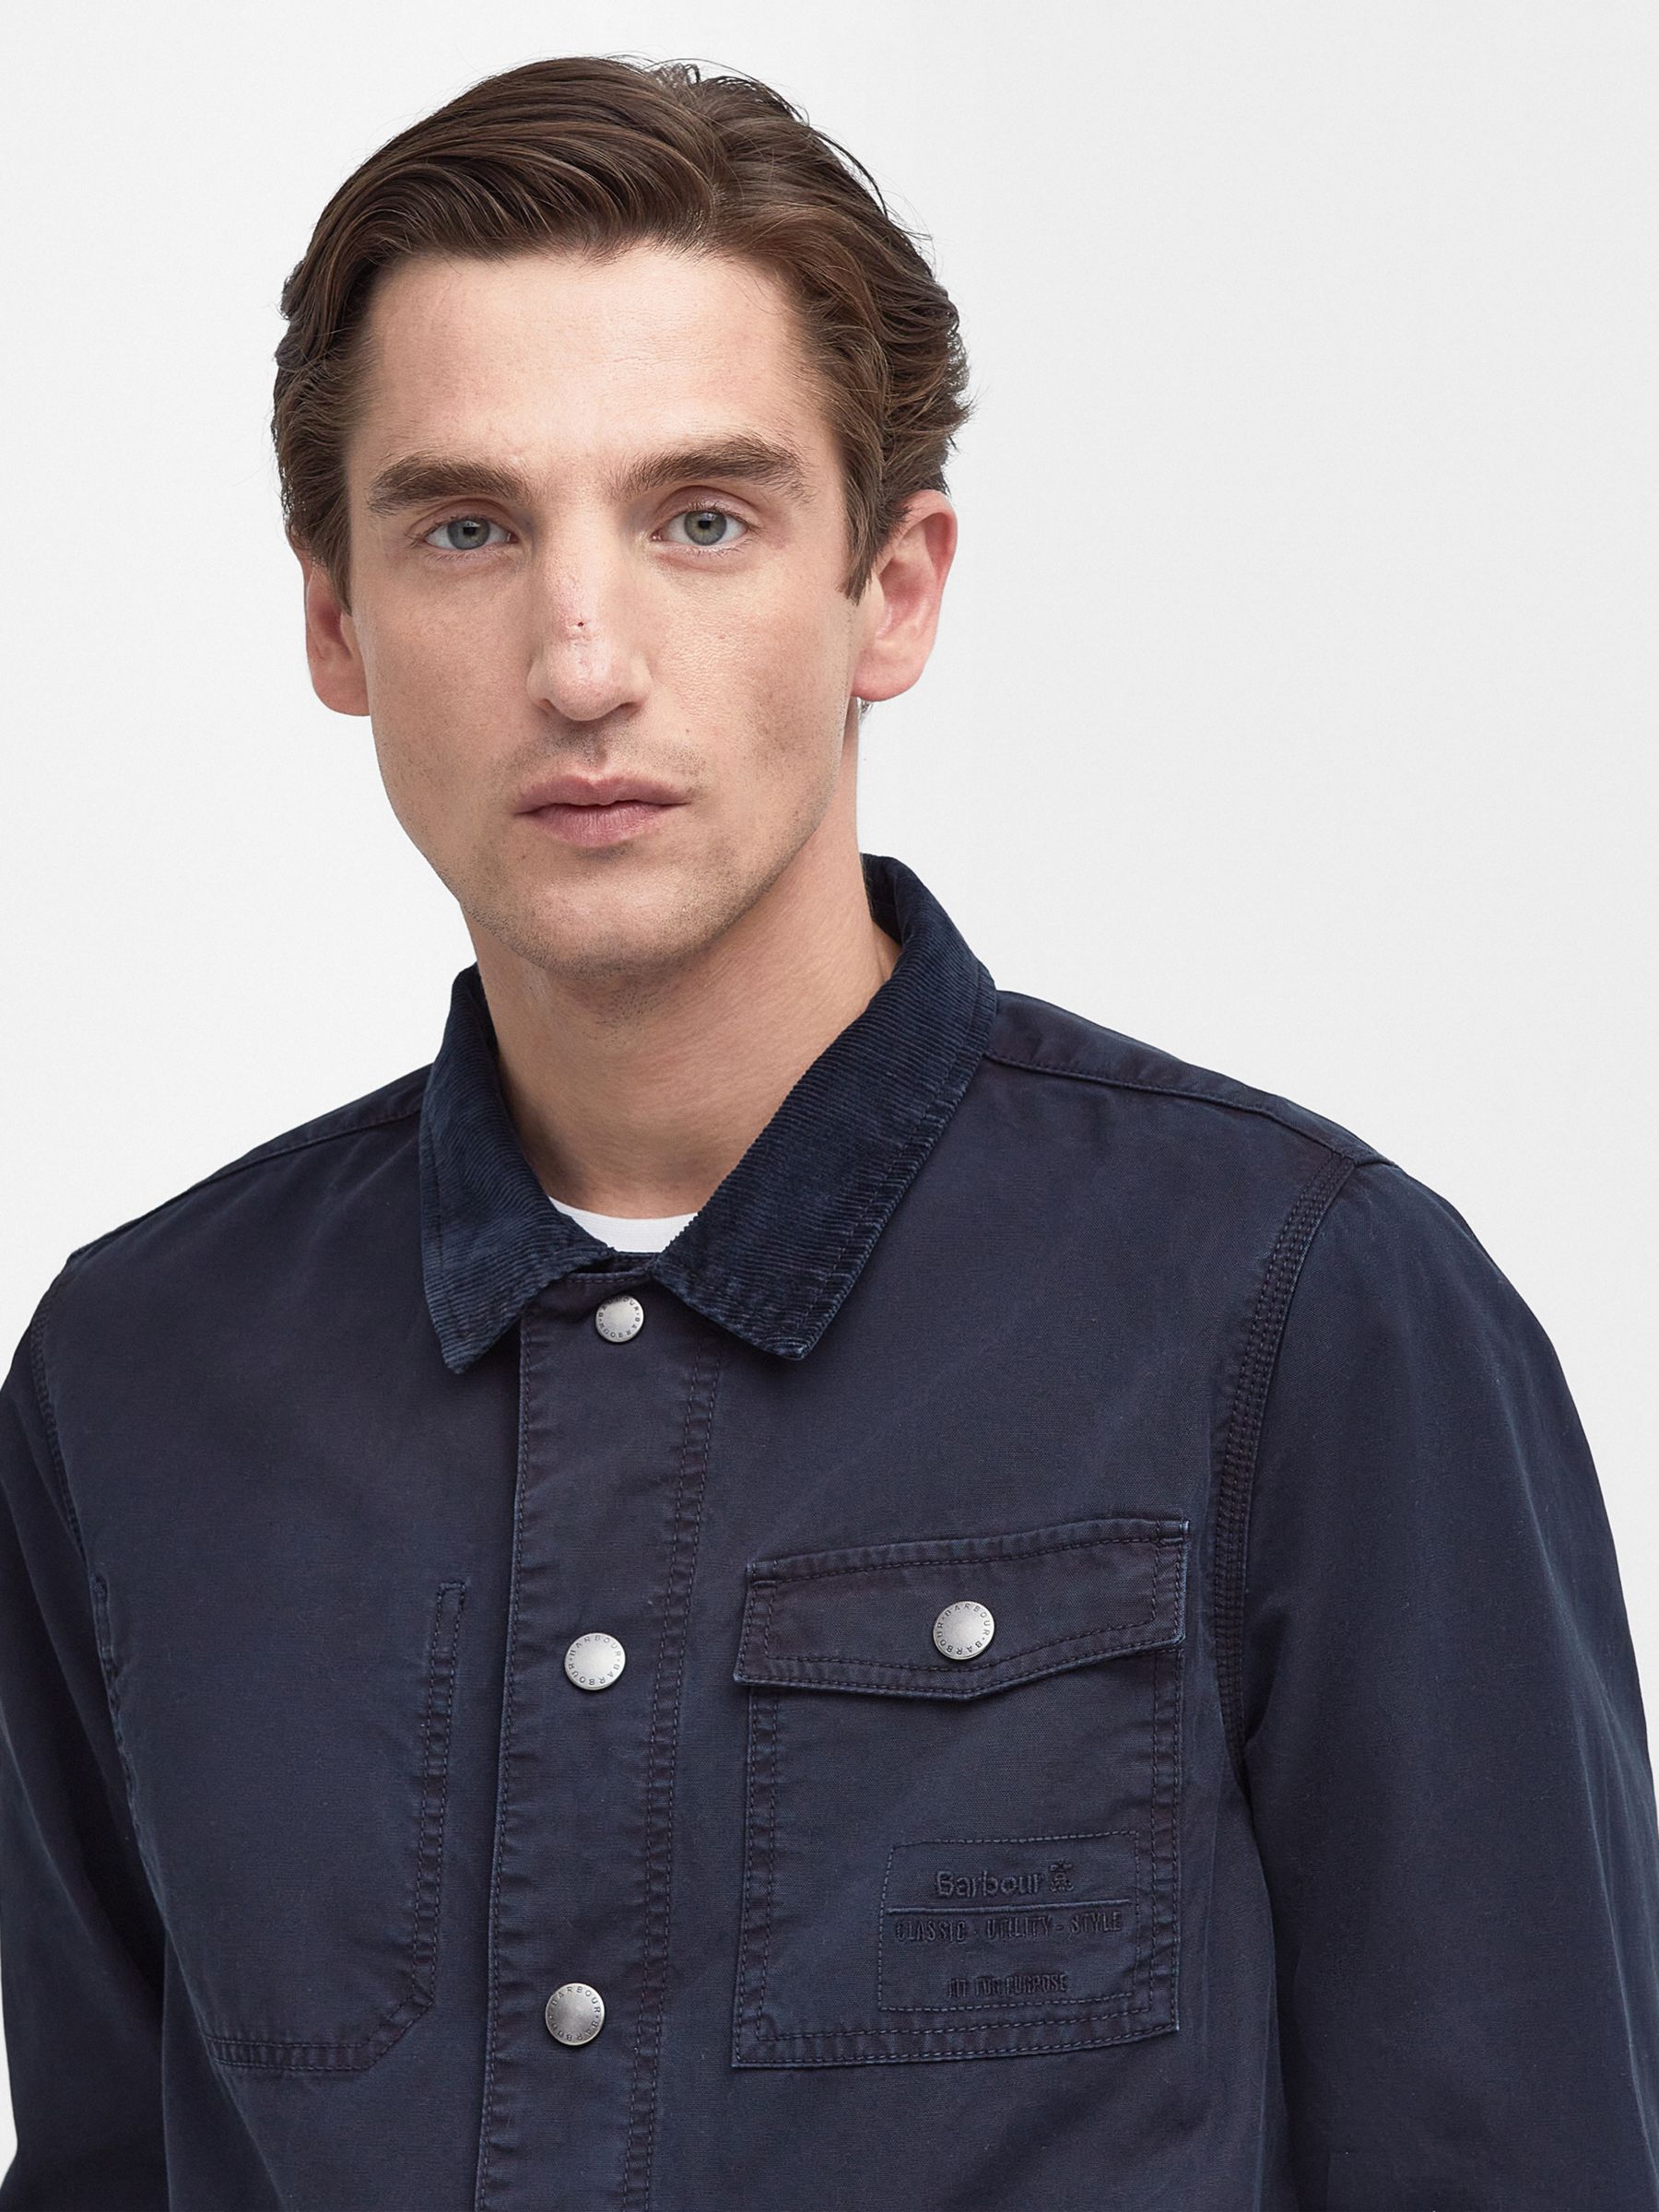 Barbour Grindle Cotton Overshirt, Navy, S